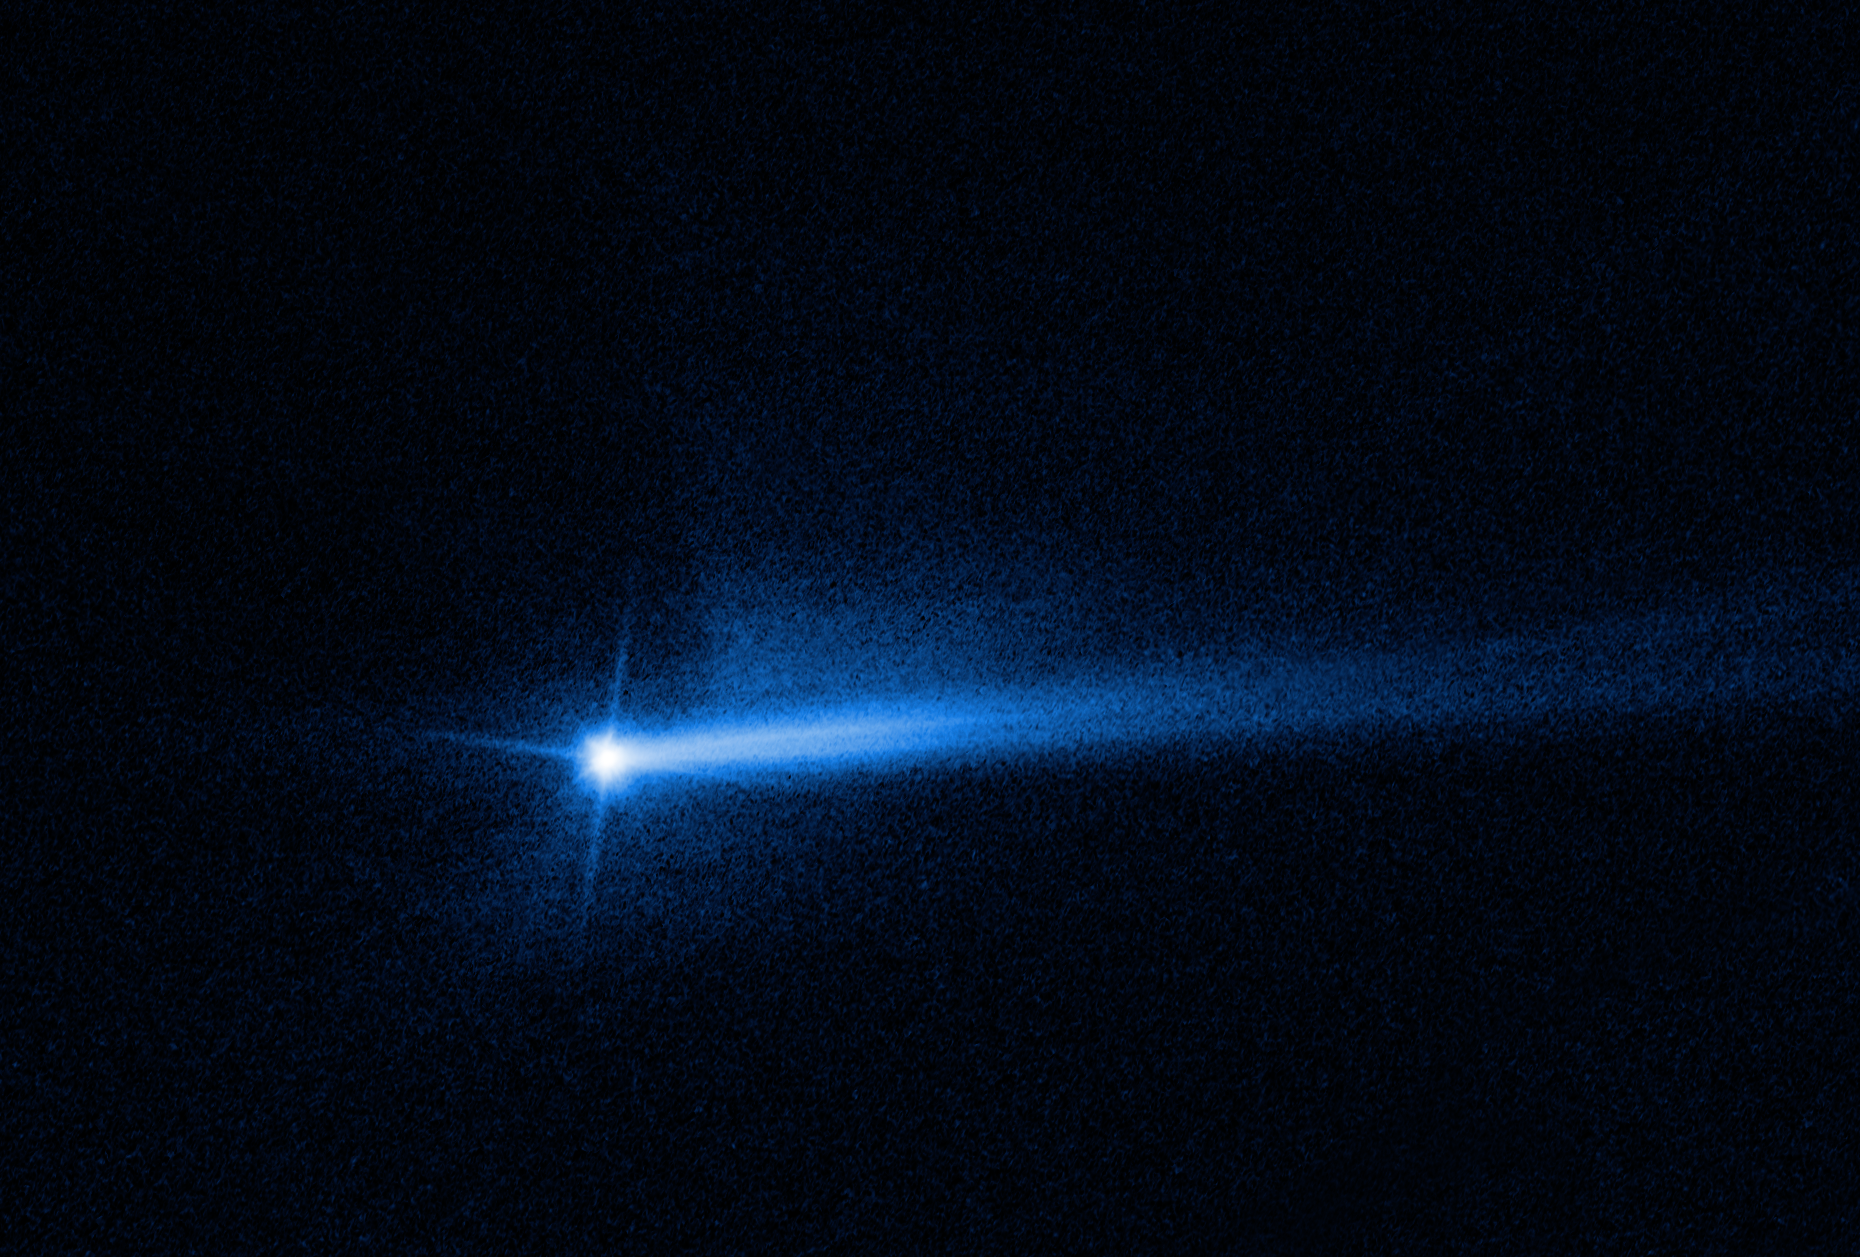 Two tails of dust ejected from the Didymos-Dimorphos asteroid system are seen in this Oct. 20 image from NASA's Hubble Space Telescope, documenting the lingering aftermath of the Sept. 26 planetary defense test.